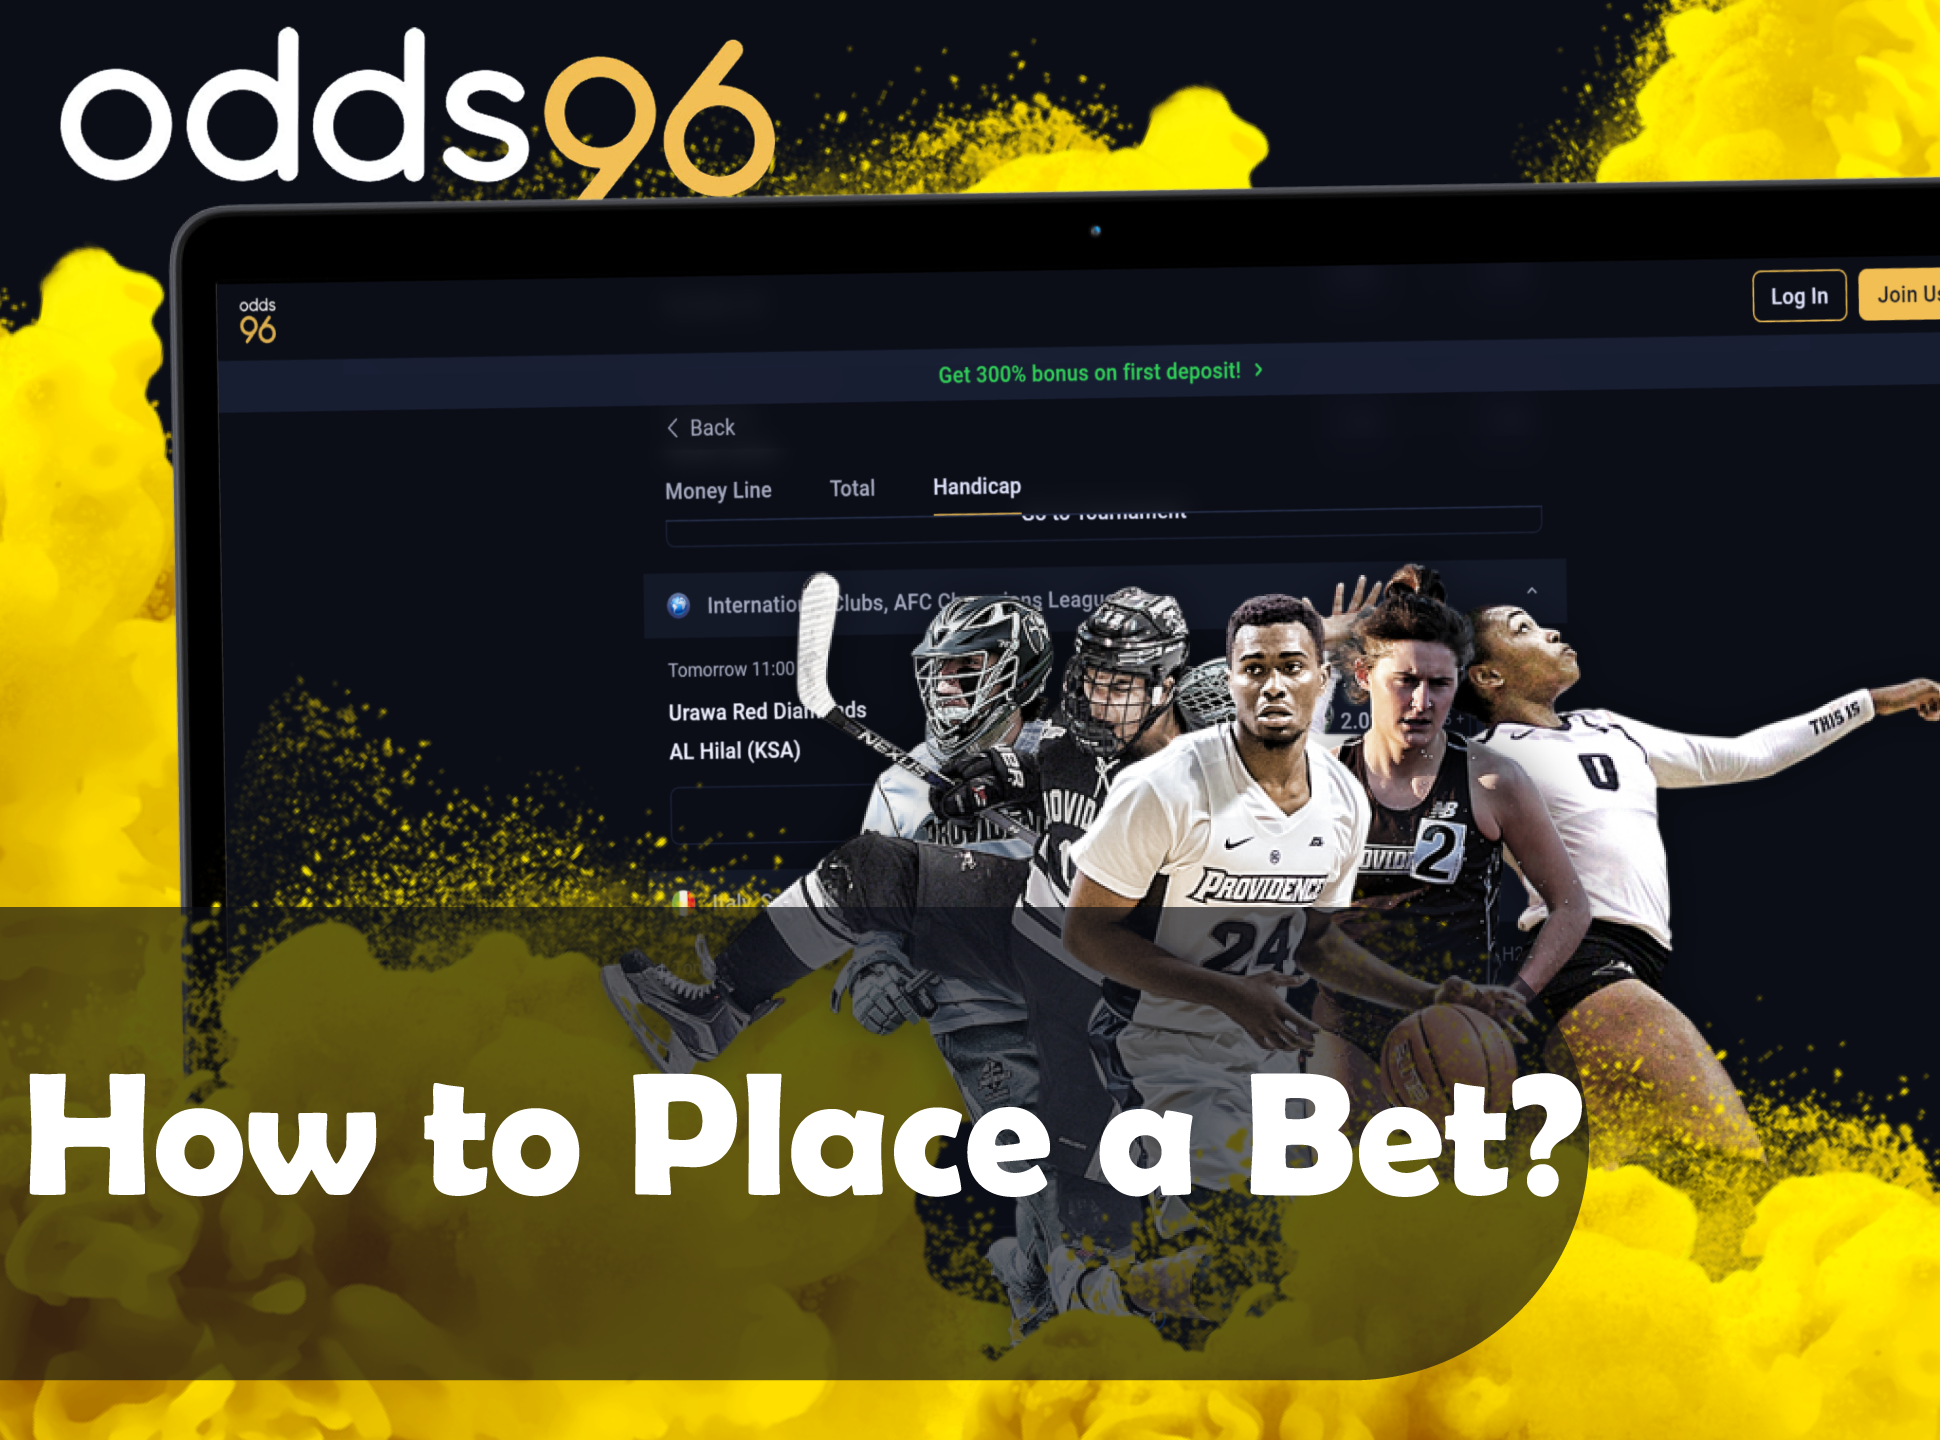 Learn how to make bets at Odds96.